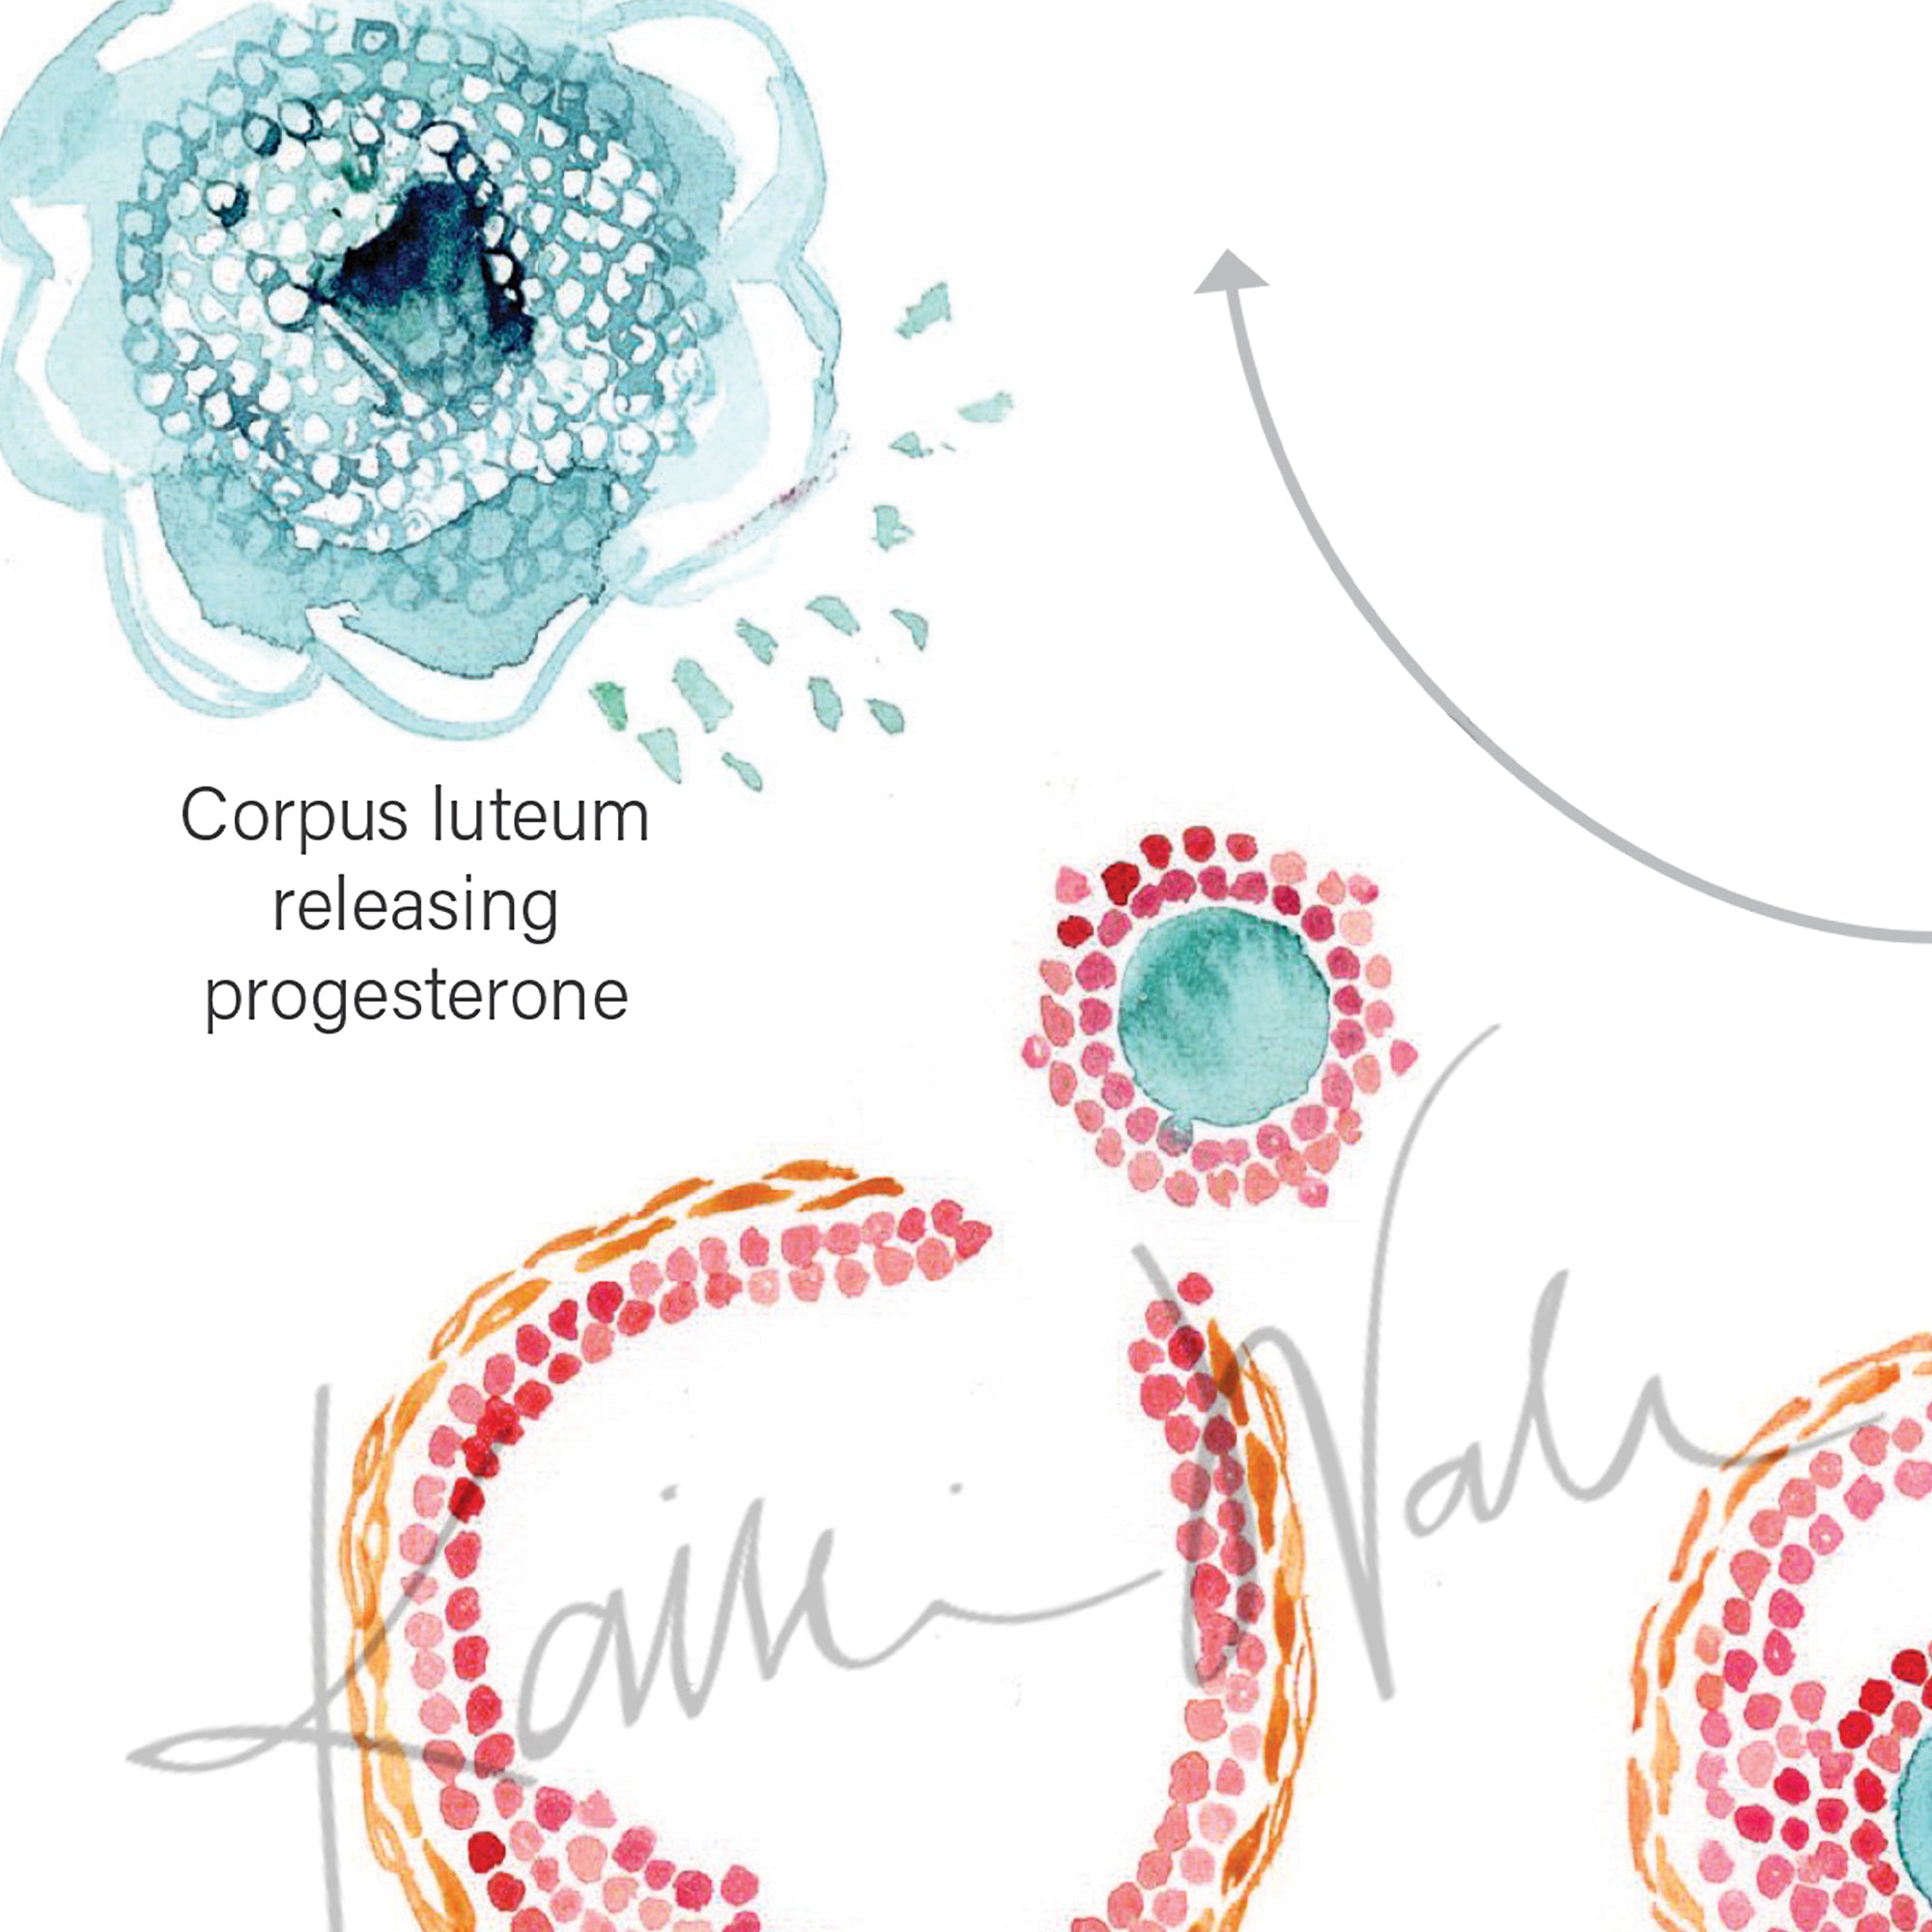 Zoomed in view of a watercolor painting of a follicle development cycle in light teals, pinks and oranges.